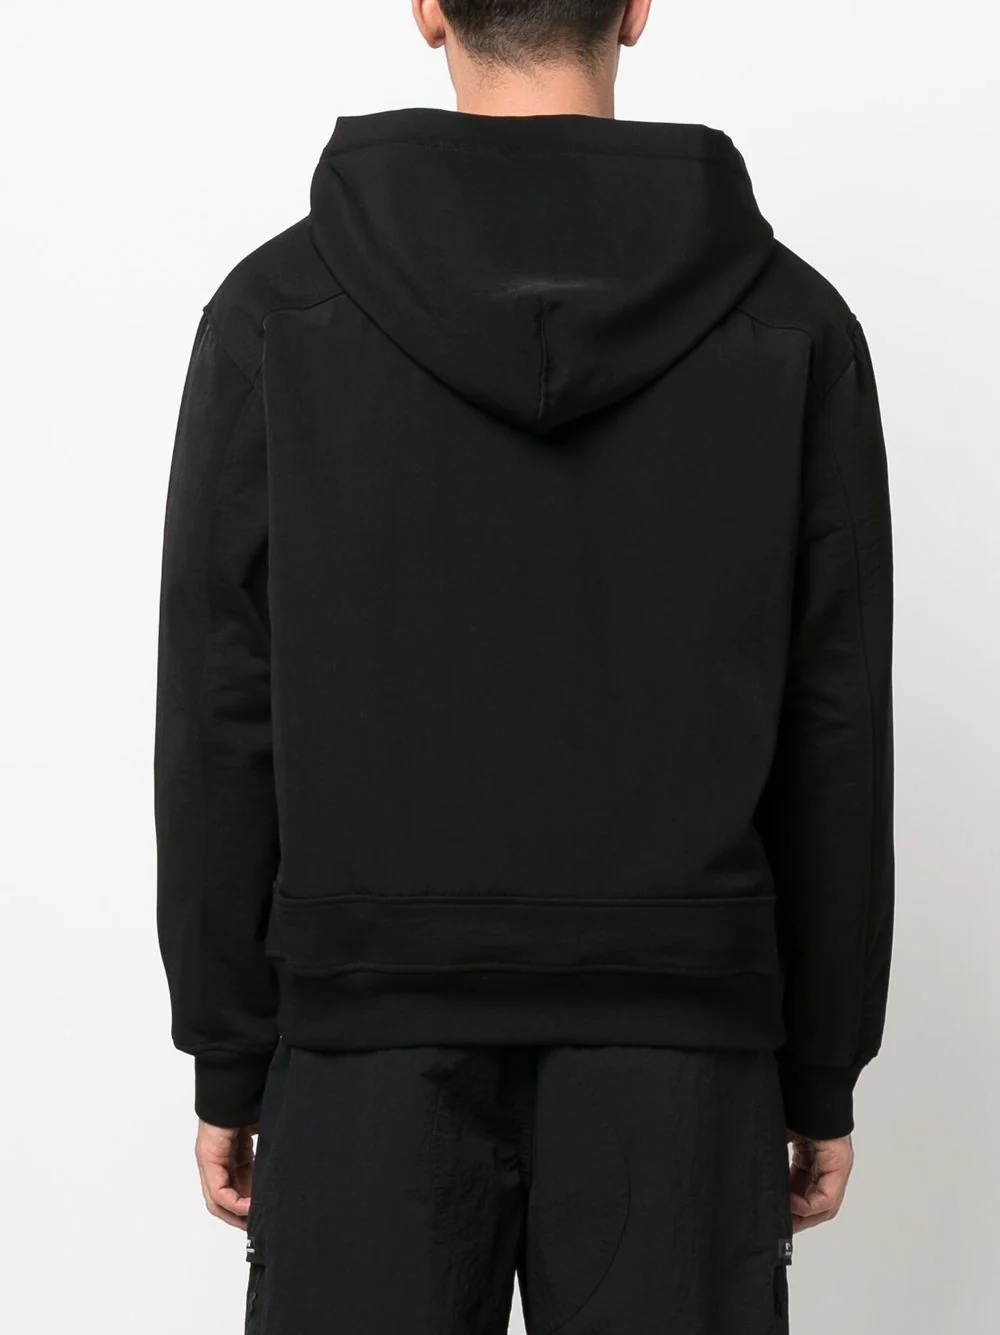 embroidered-logo zip-up hoodie - 6